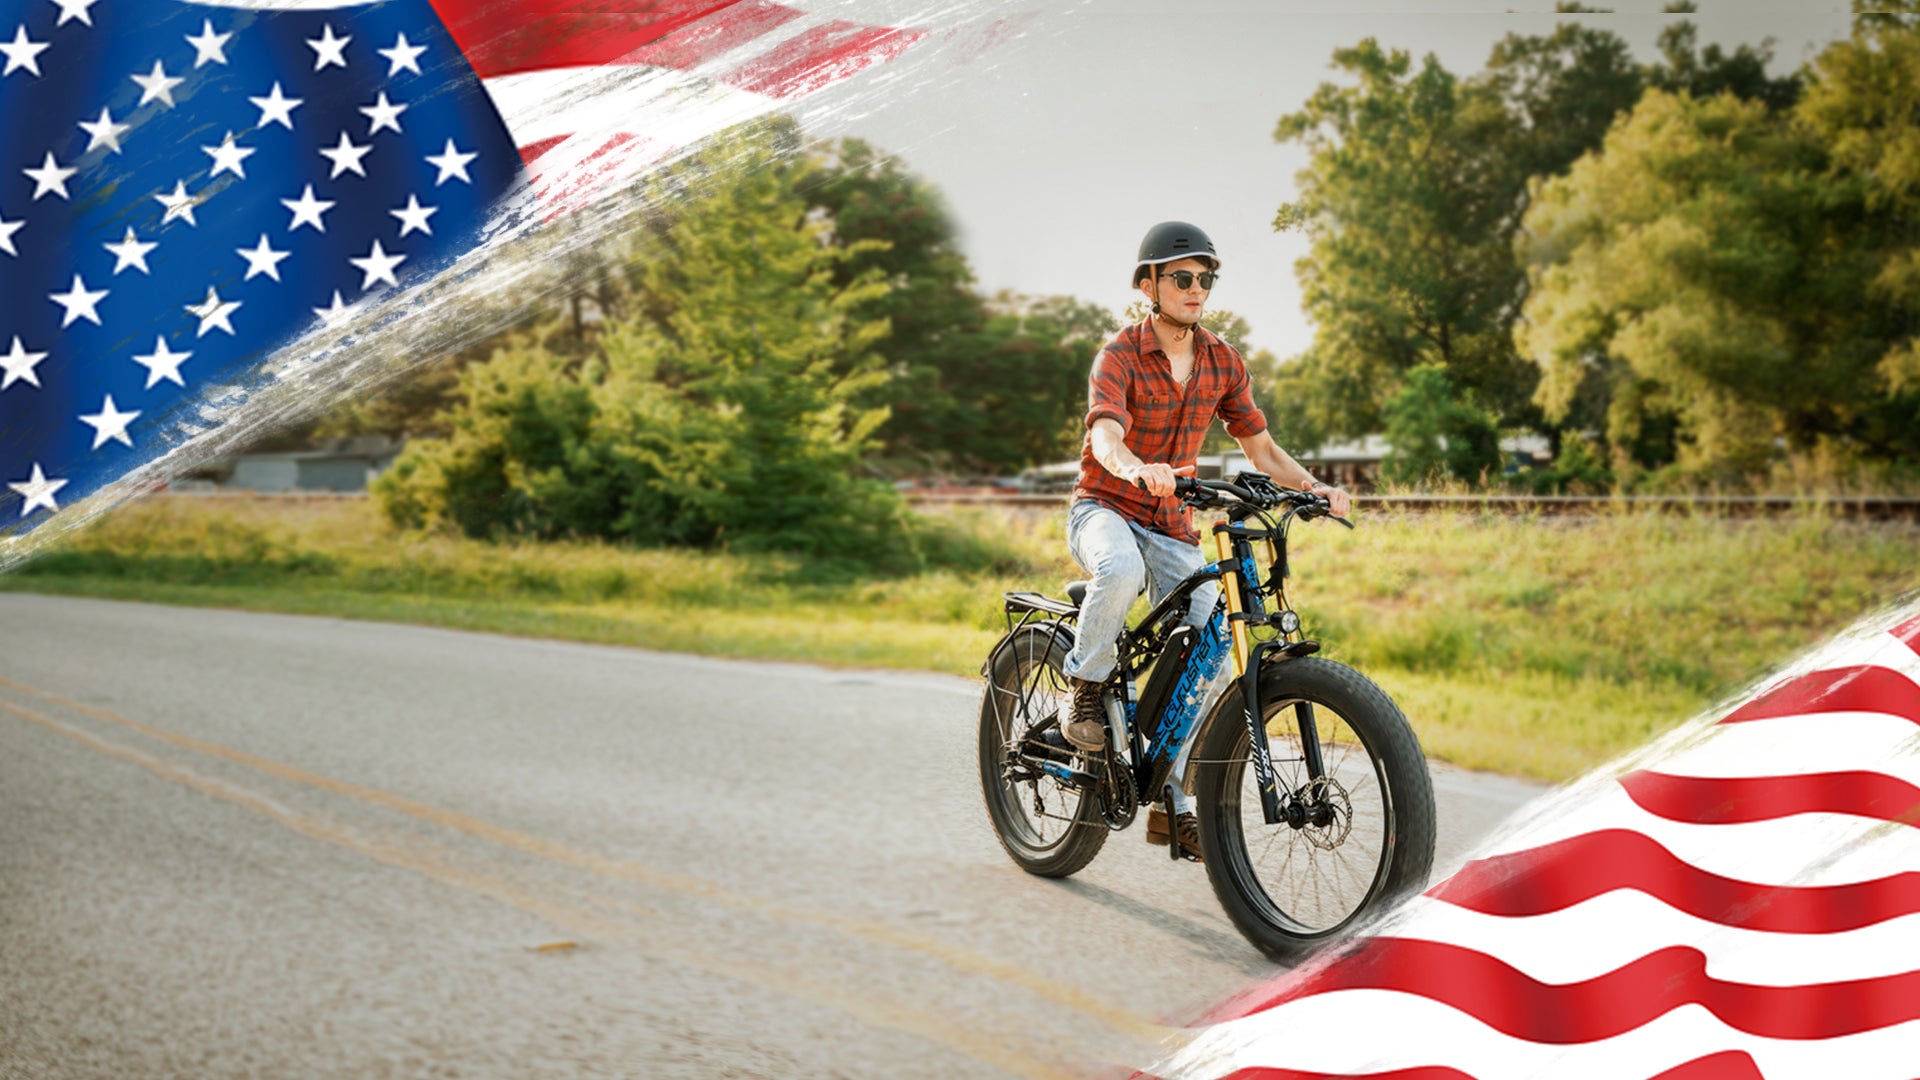 Blog-Cyrusher Ebike Celebrates Independence Day by Advocating for an Independent Lifestyle